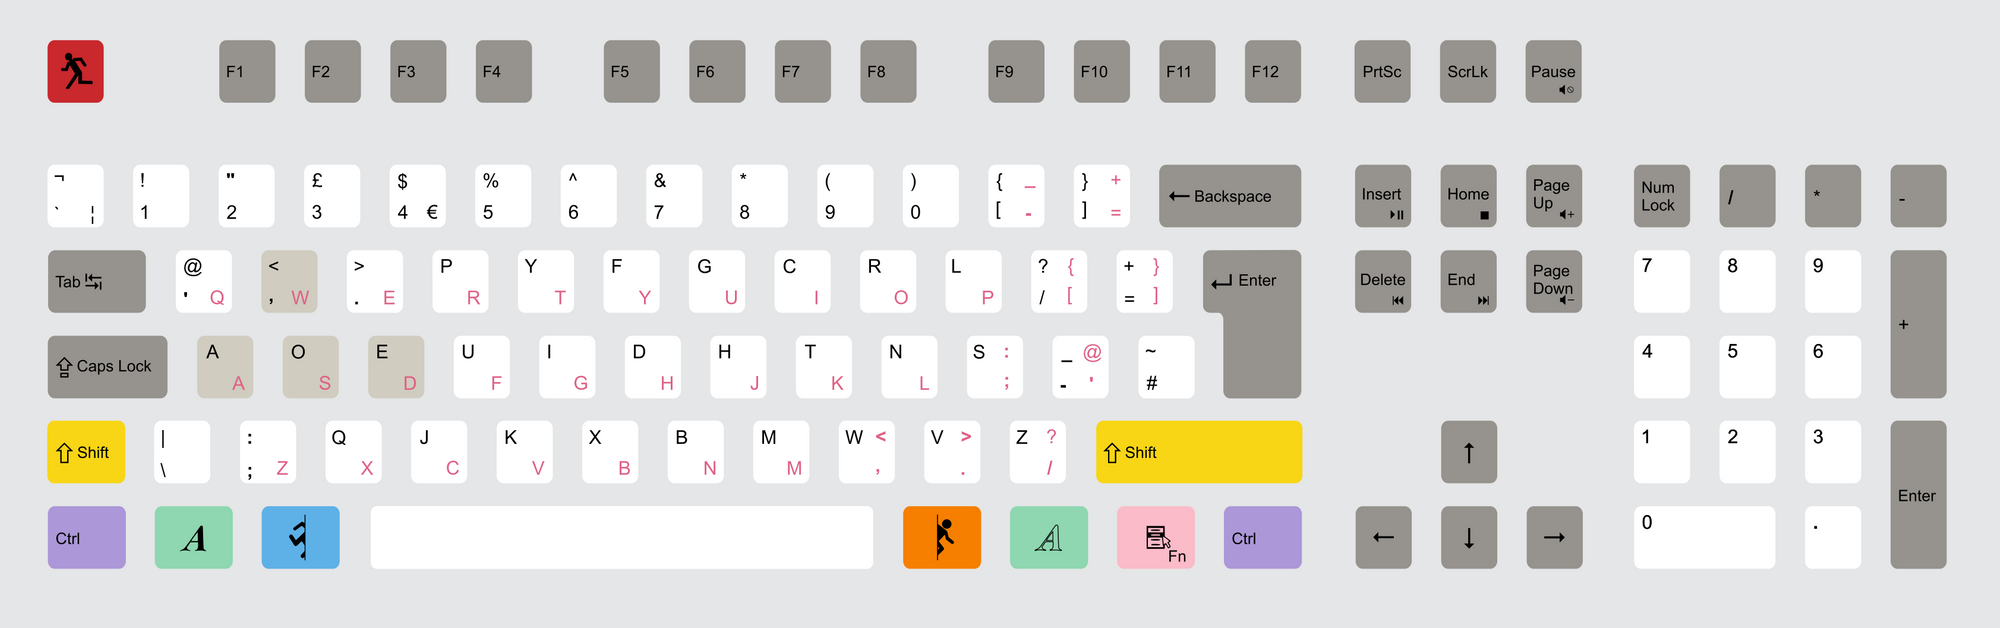 Keyboard layout image showing my customisations, prior to printing.